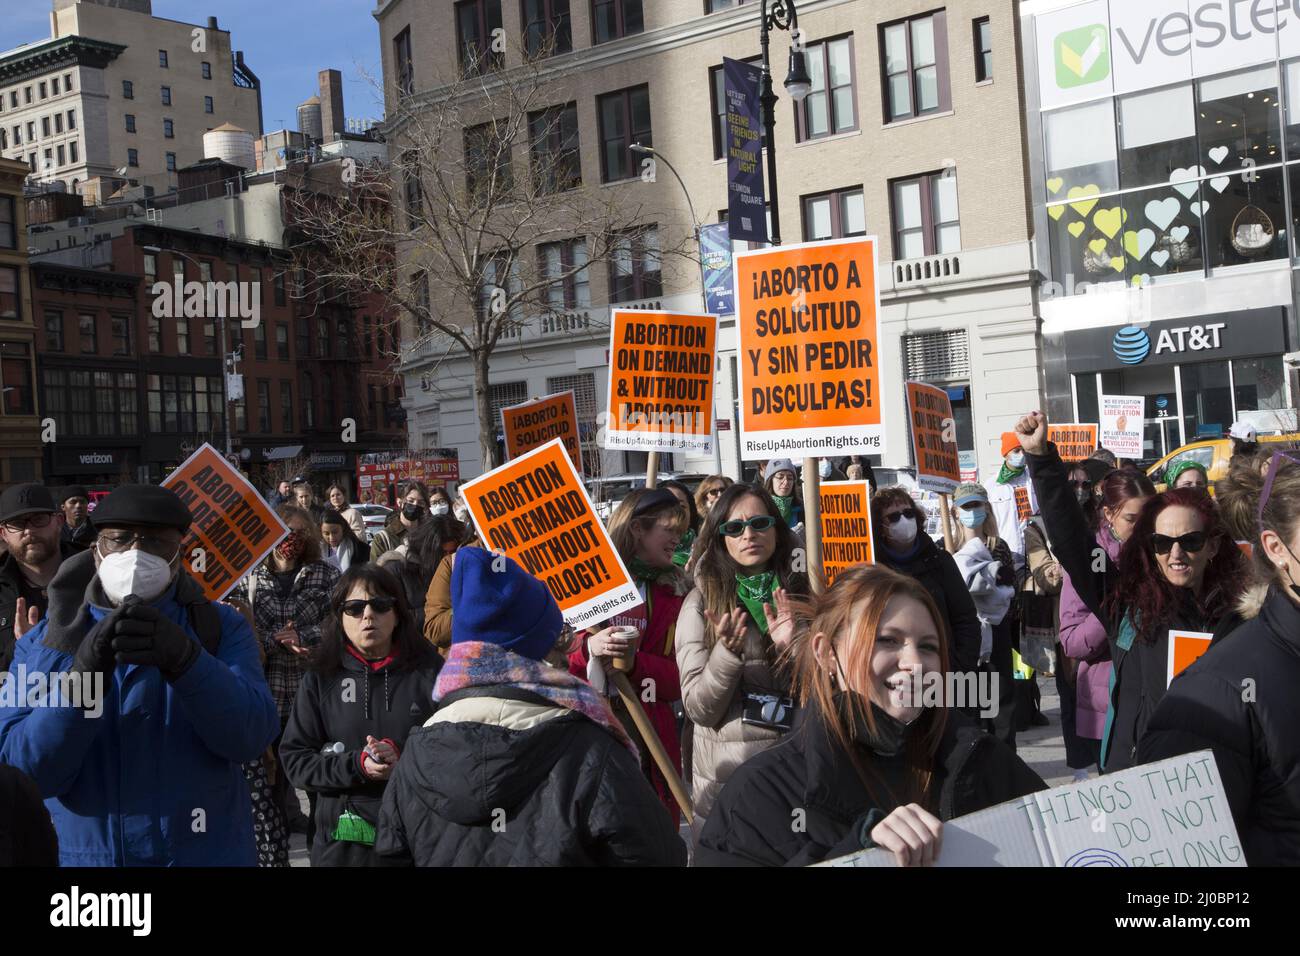 Women and men gather on International Women's Day at Union Square to protest, Rally and march against the widespread attack on a woman's right to abortion in the United States blocking control over ones own body. New York City. Stock Photo